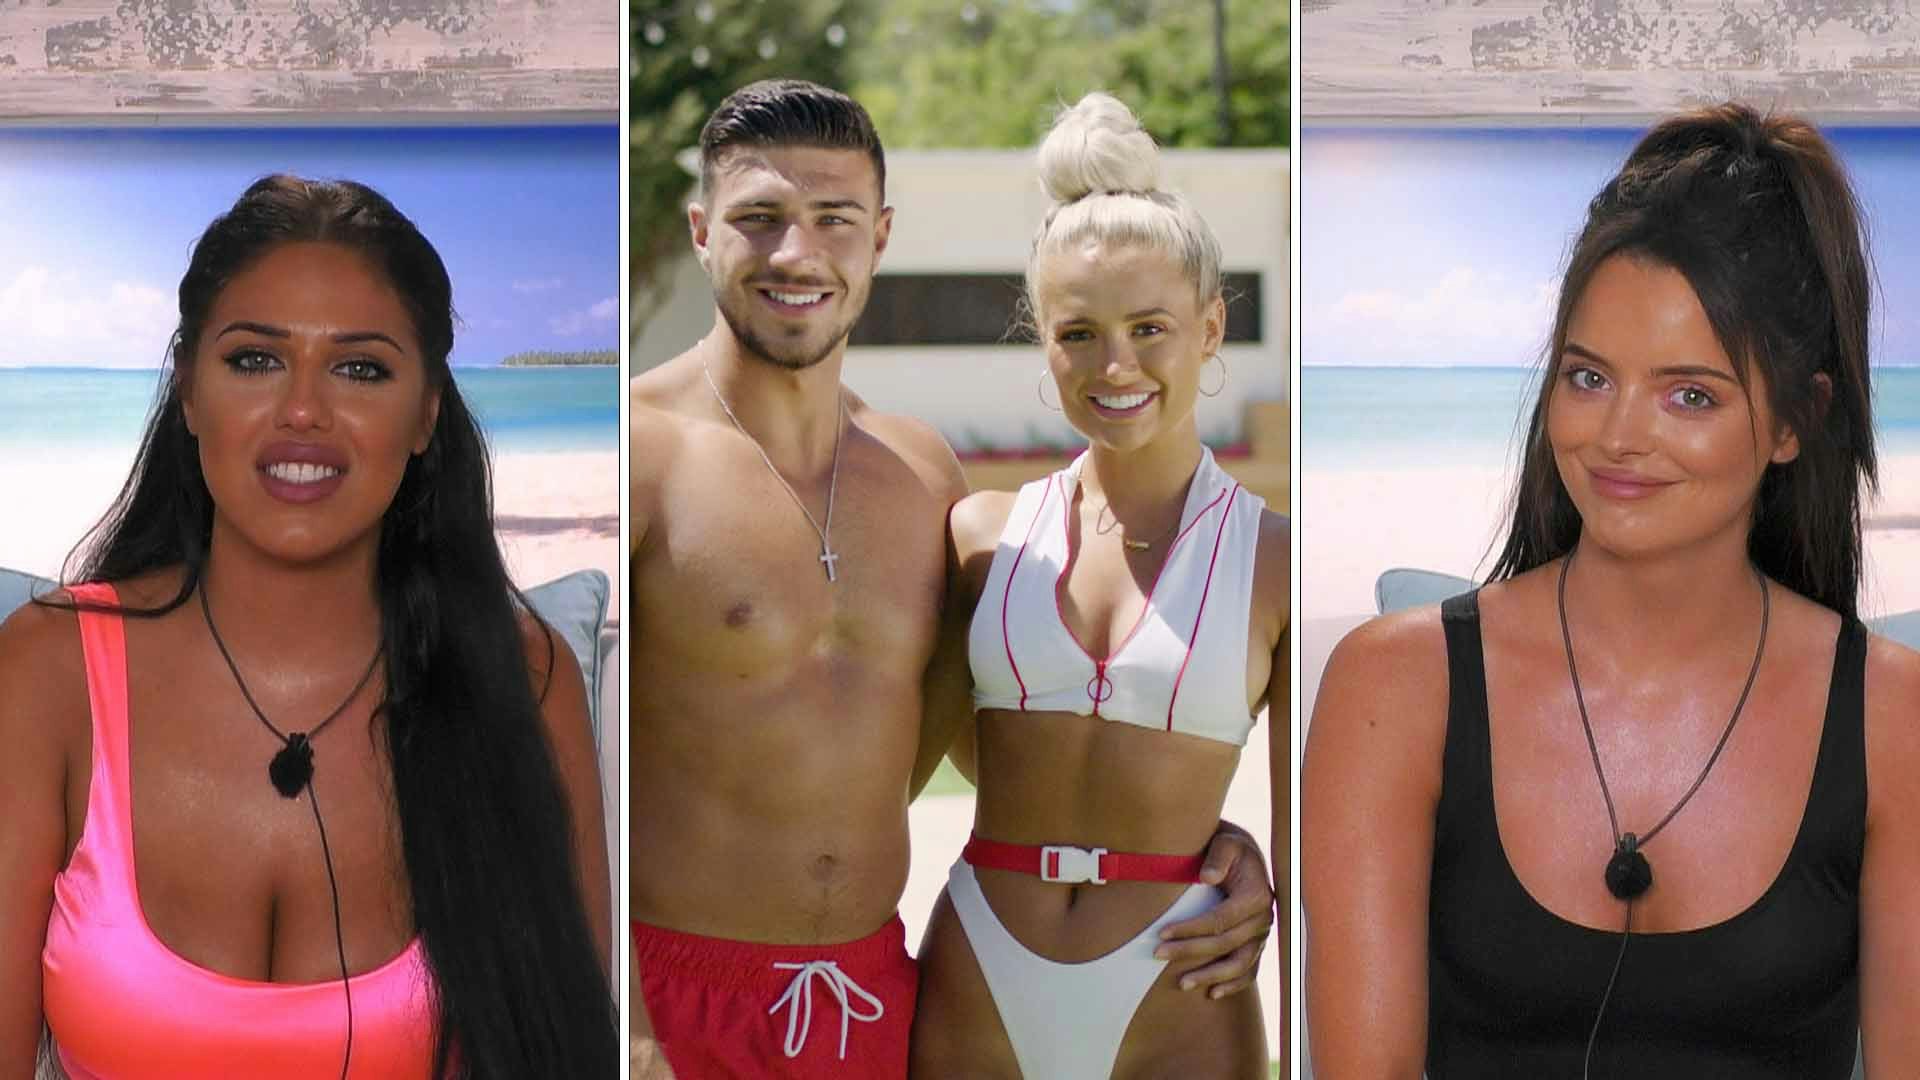 Inside Love Island The Games star Wes Nelson's amazing home with